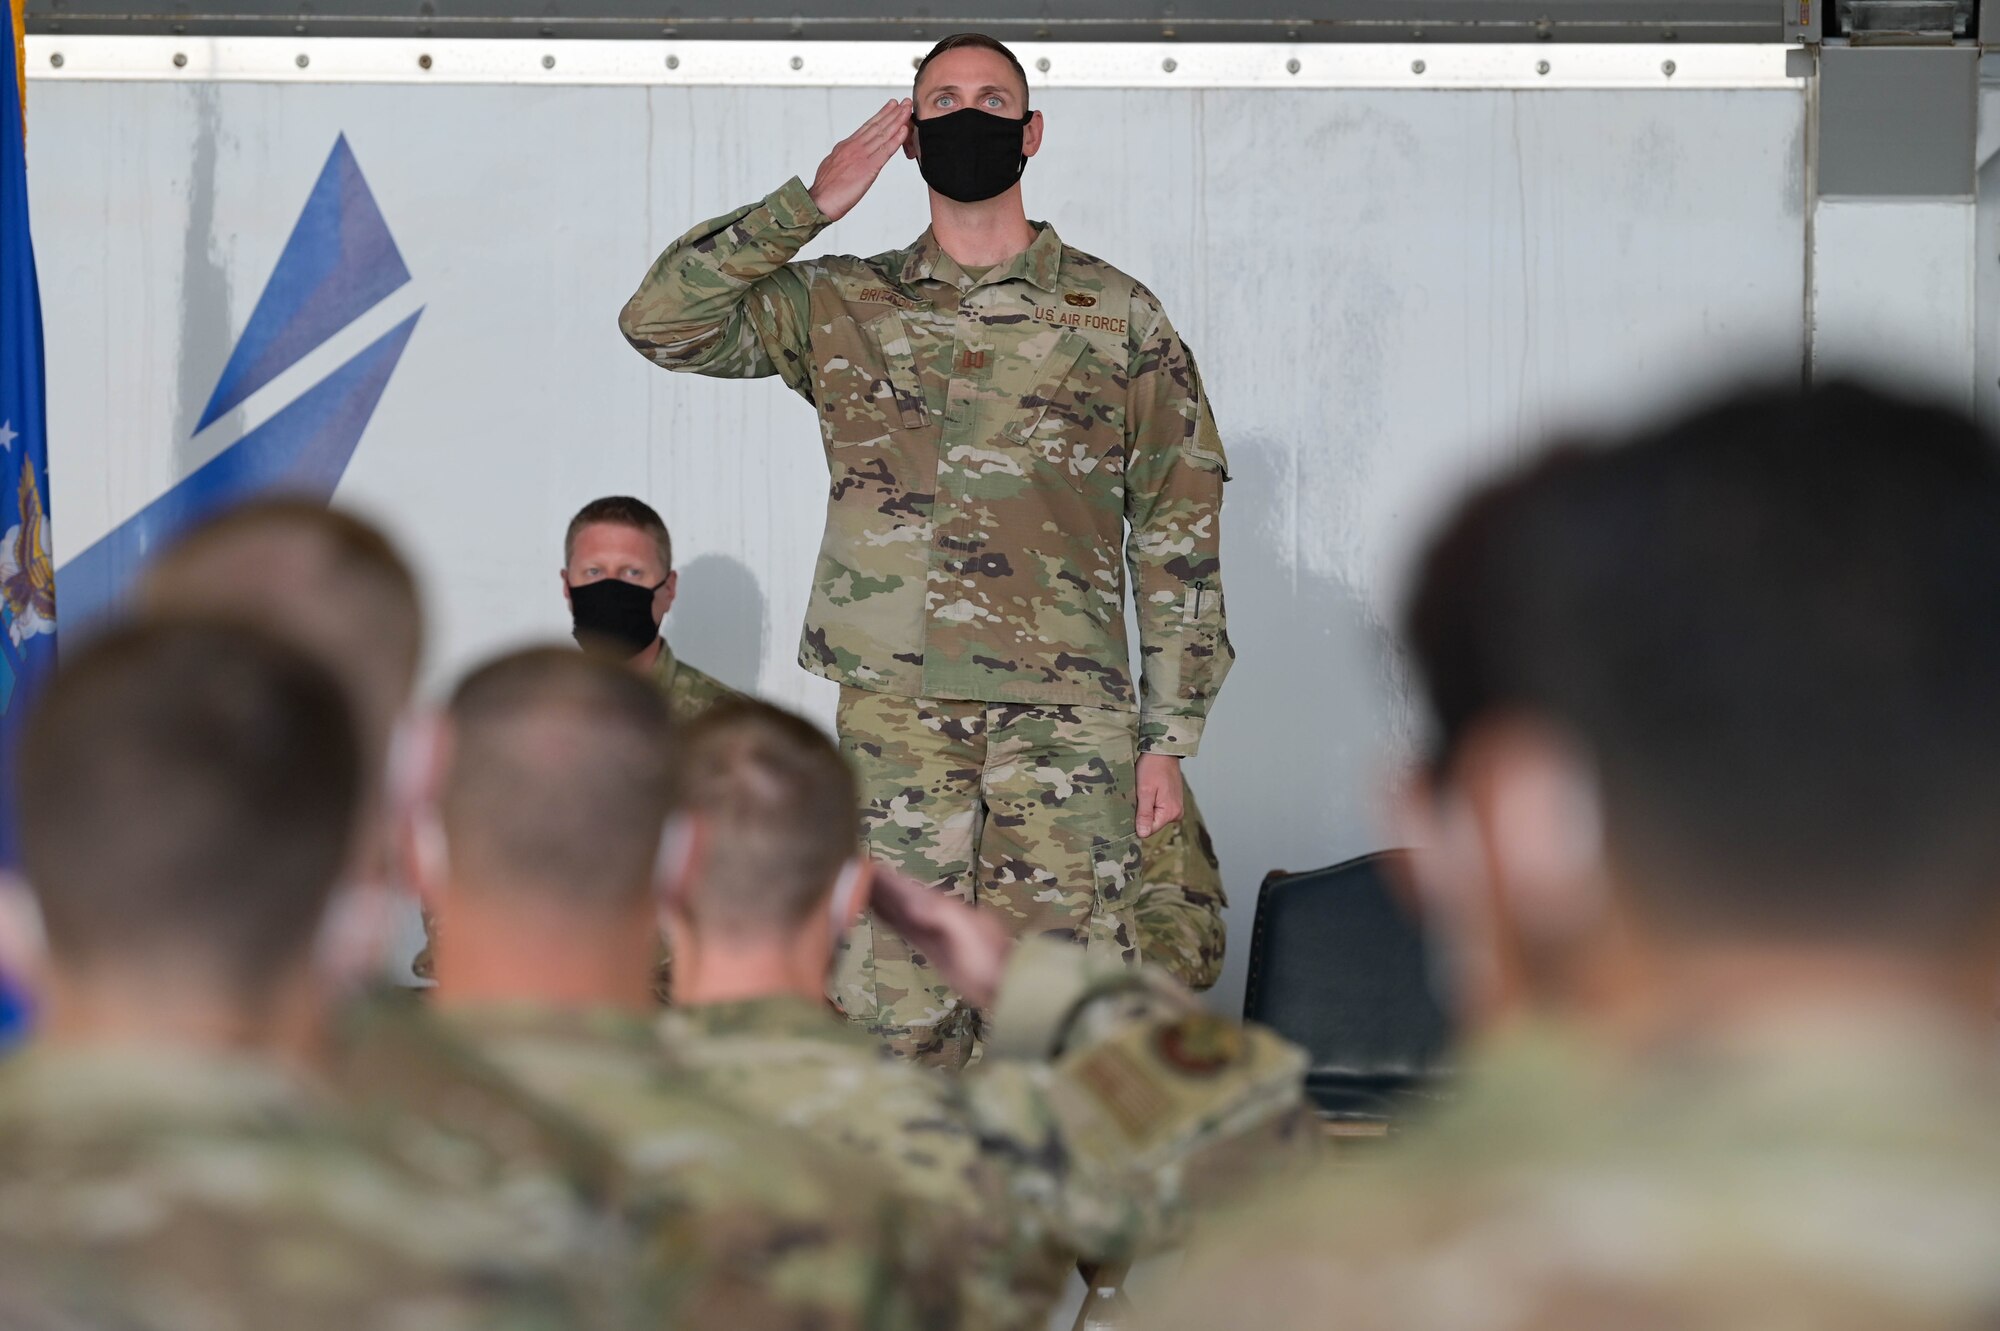 U.S. Air Force Capt. Patrick Britton, 71st Rescue Generation Squadron commander, received his first salute at Moody Air Force Base, Georgia, Oct. 1, 2021. The organizational change created smaller, agile squadrons with the goal to increase the growth and productivity. (U.S. Air Force photo by Senior Airman Rebeckah Medeiros)